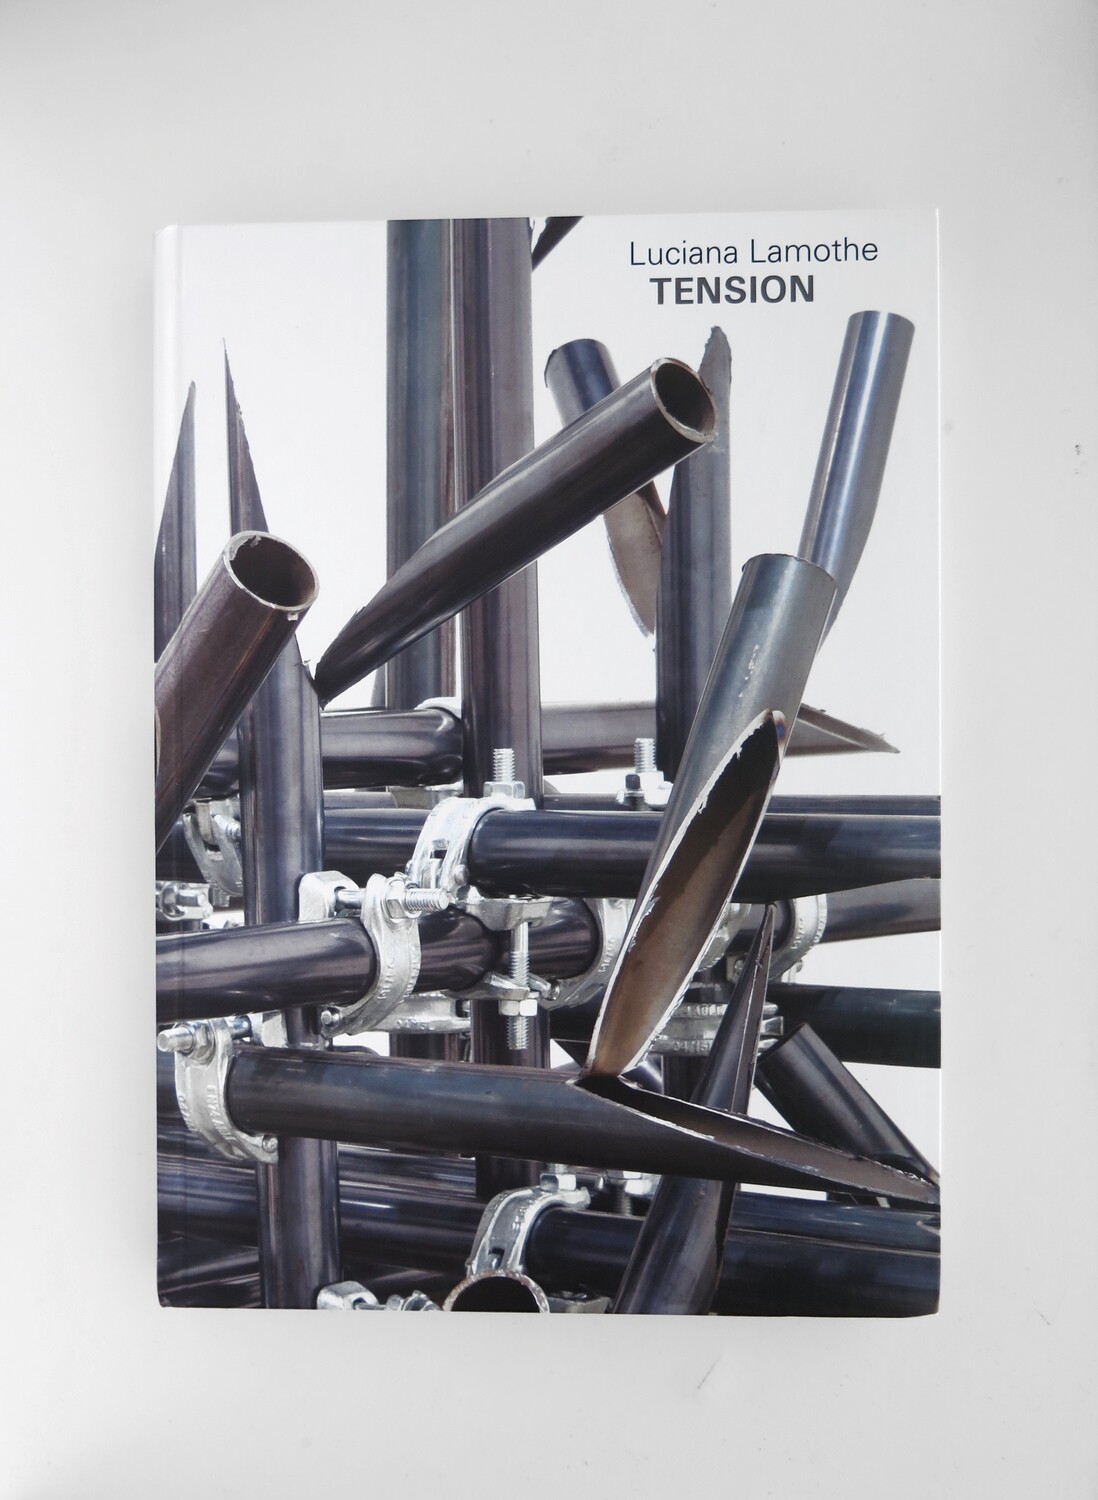 Tension by Luciana Lamothe